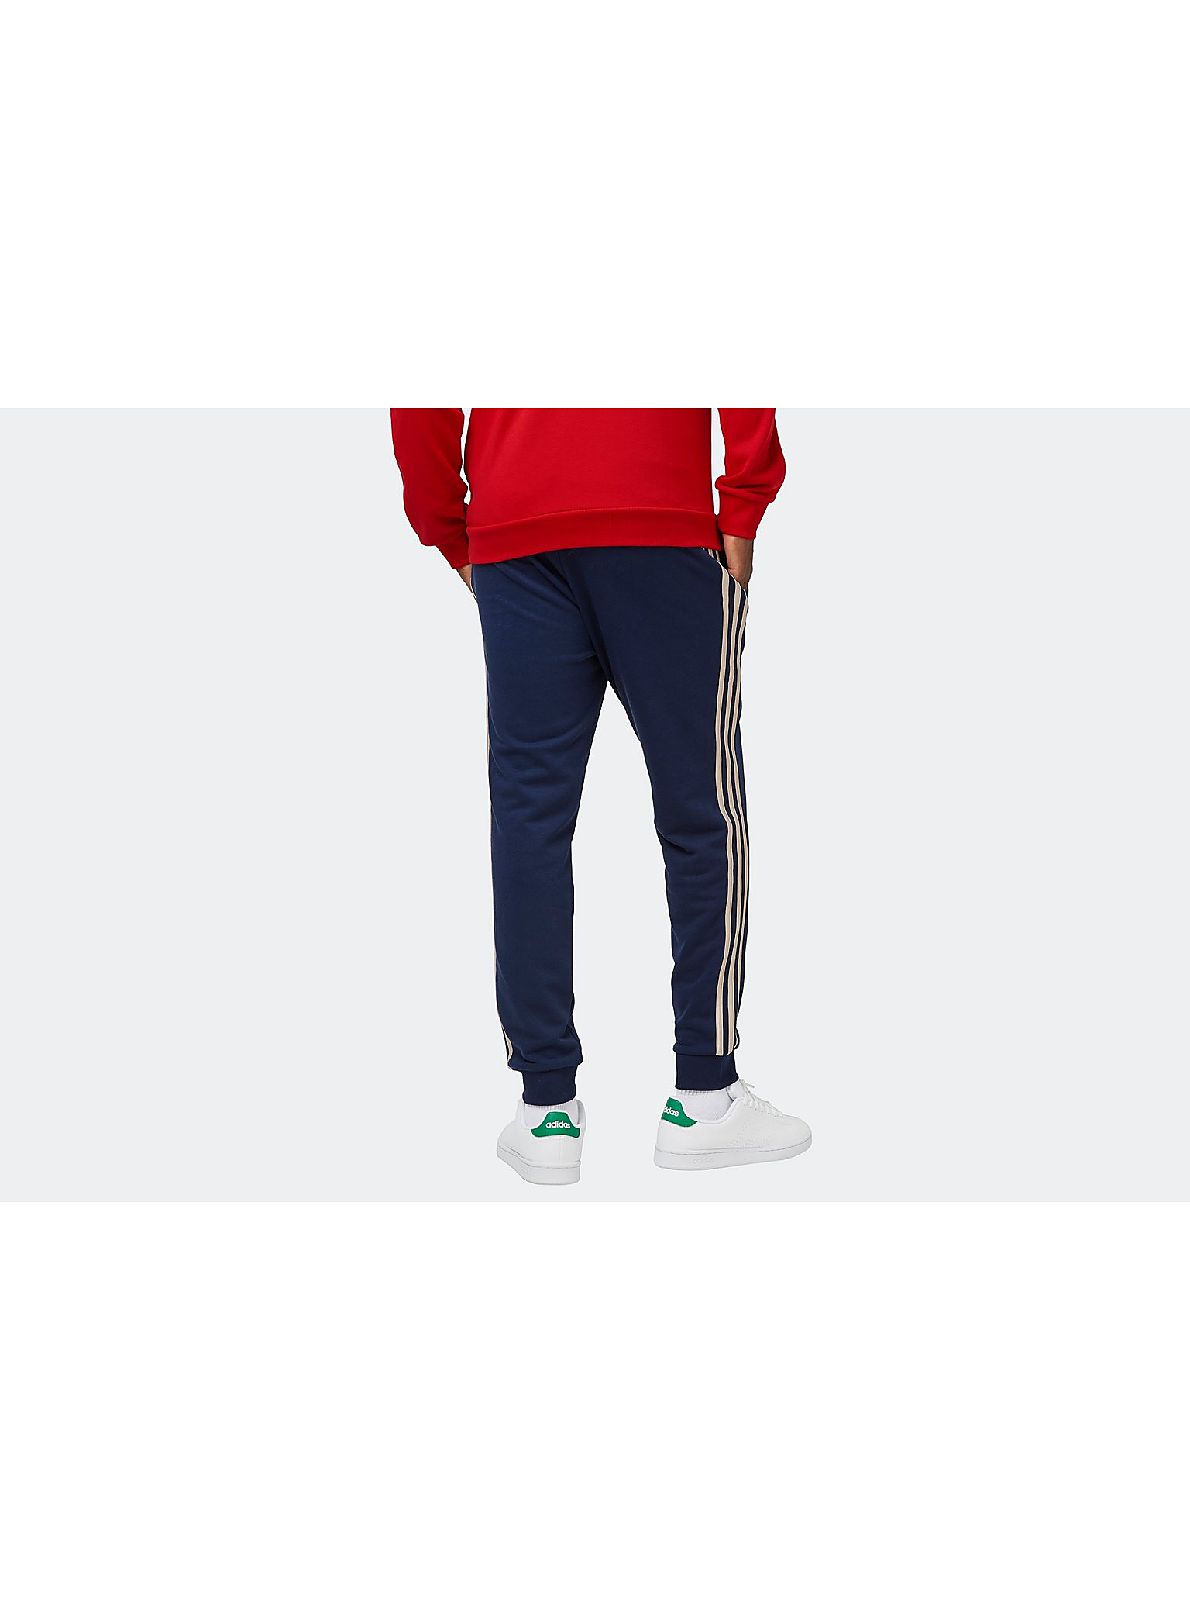 Arsenal 23/24 DNA Pants | Official Online Store